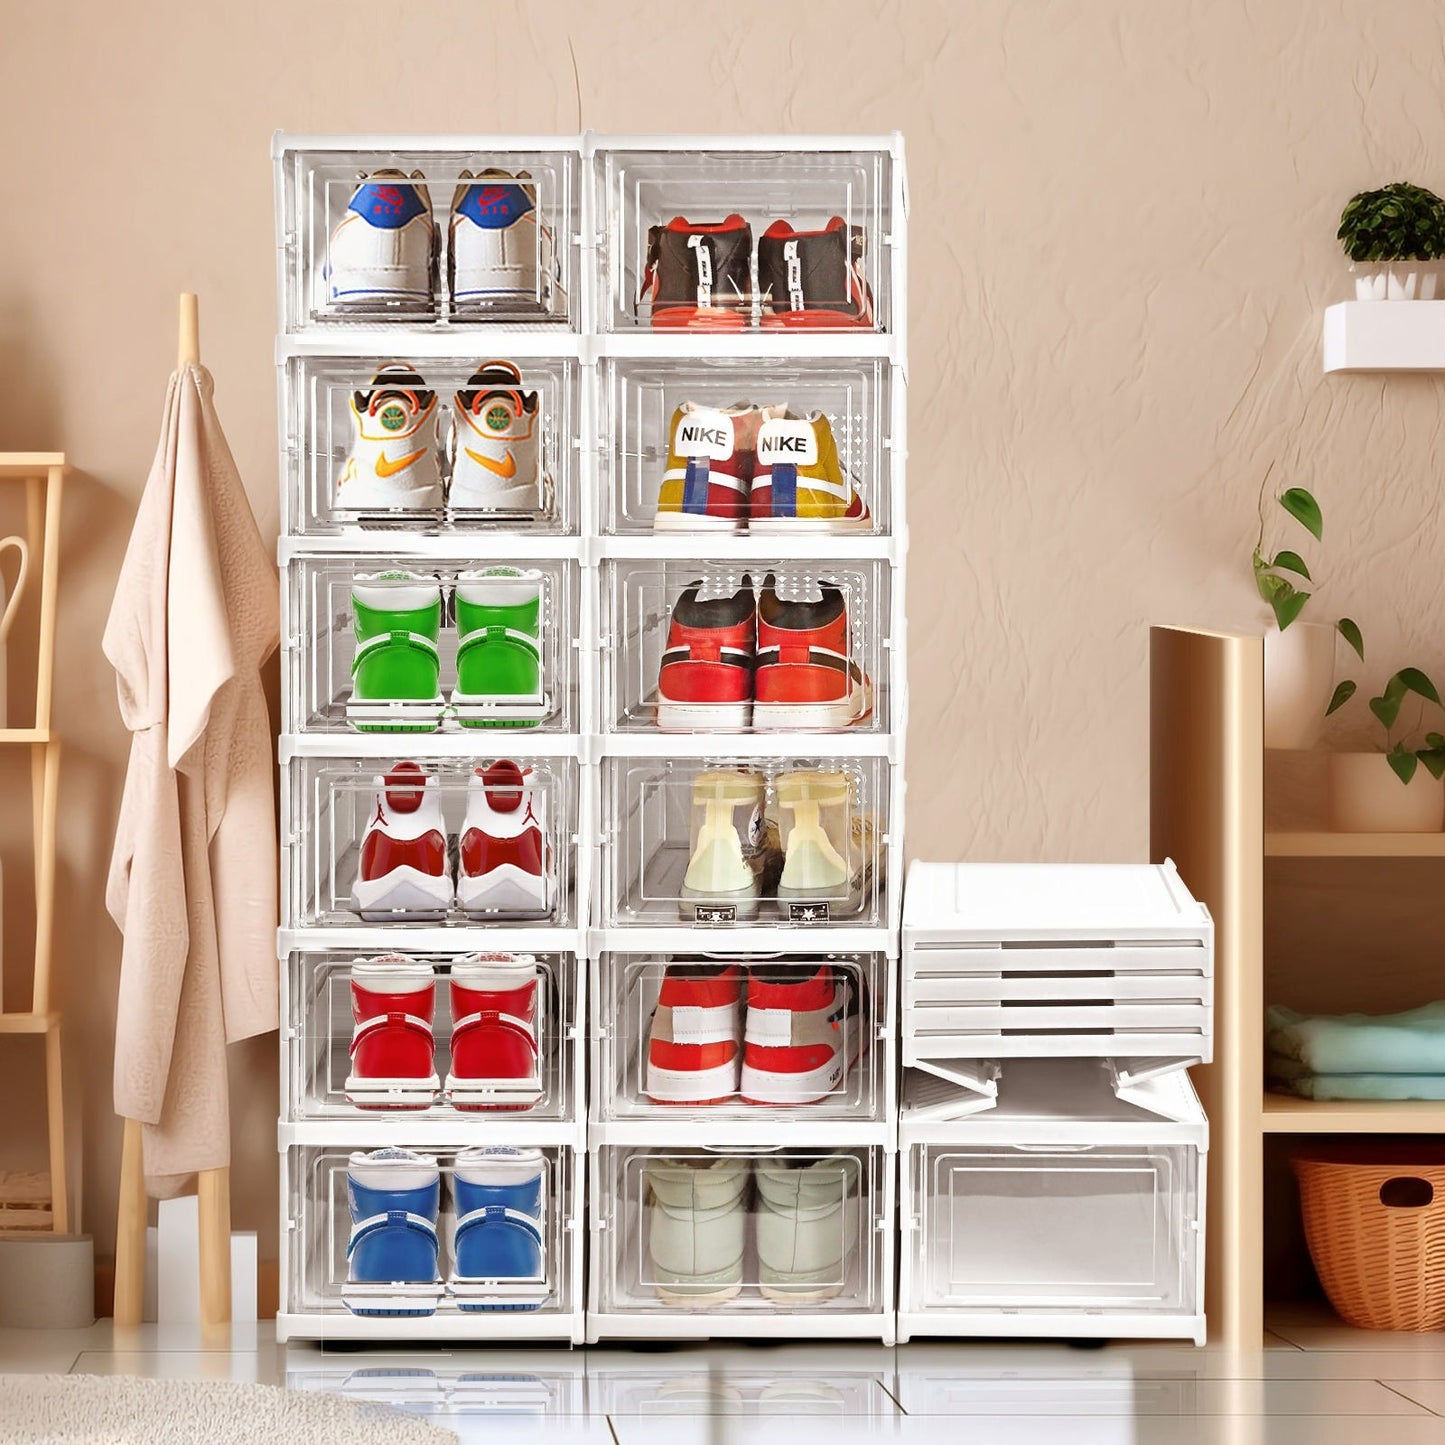 Collapsible Shoe Rack & Organizer Set of 6-Tier